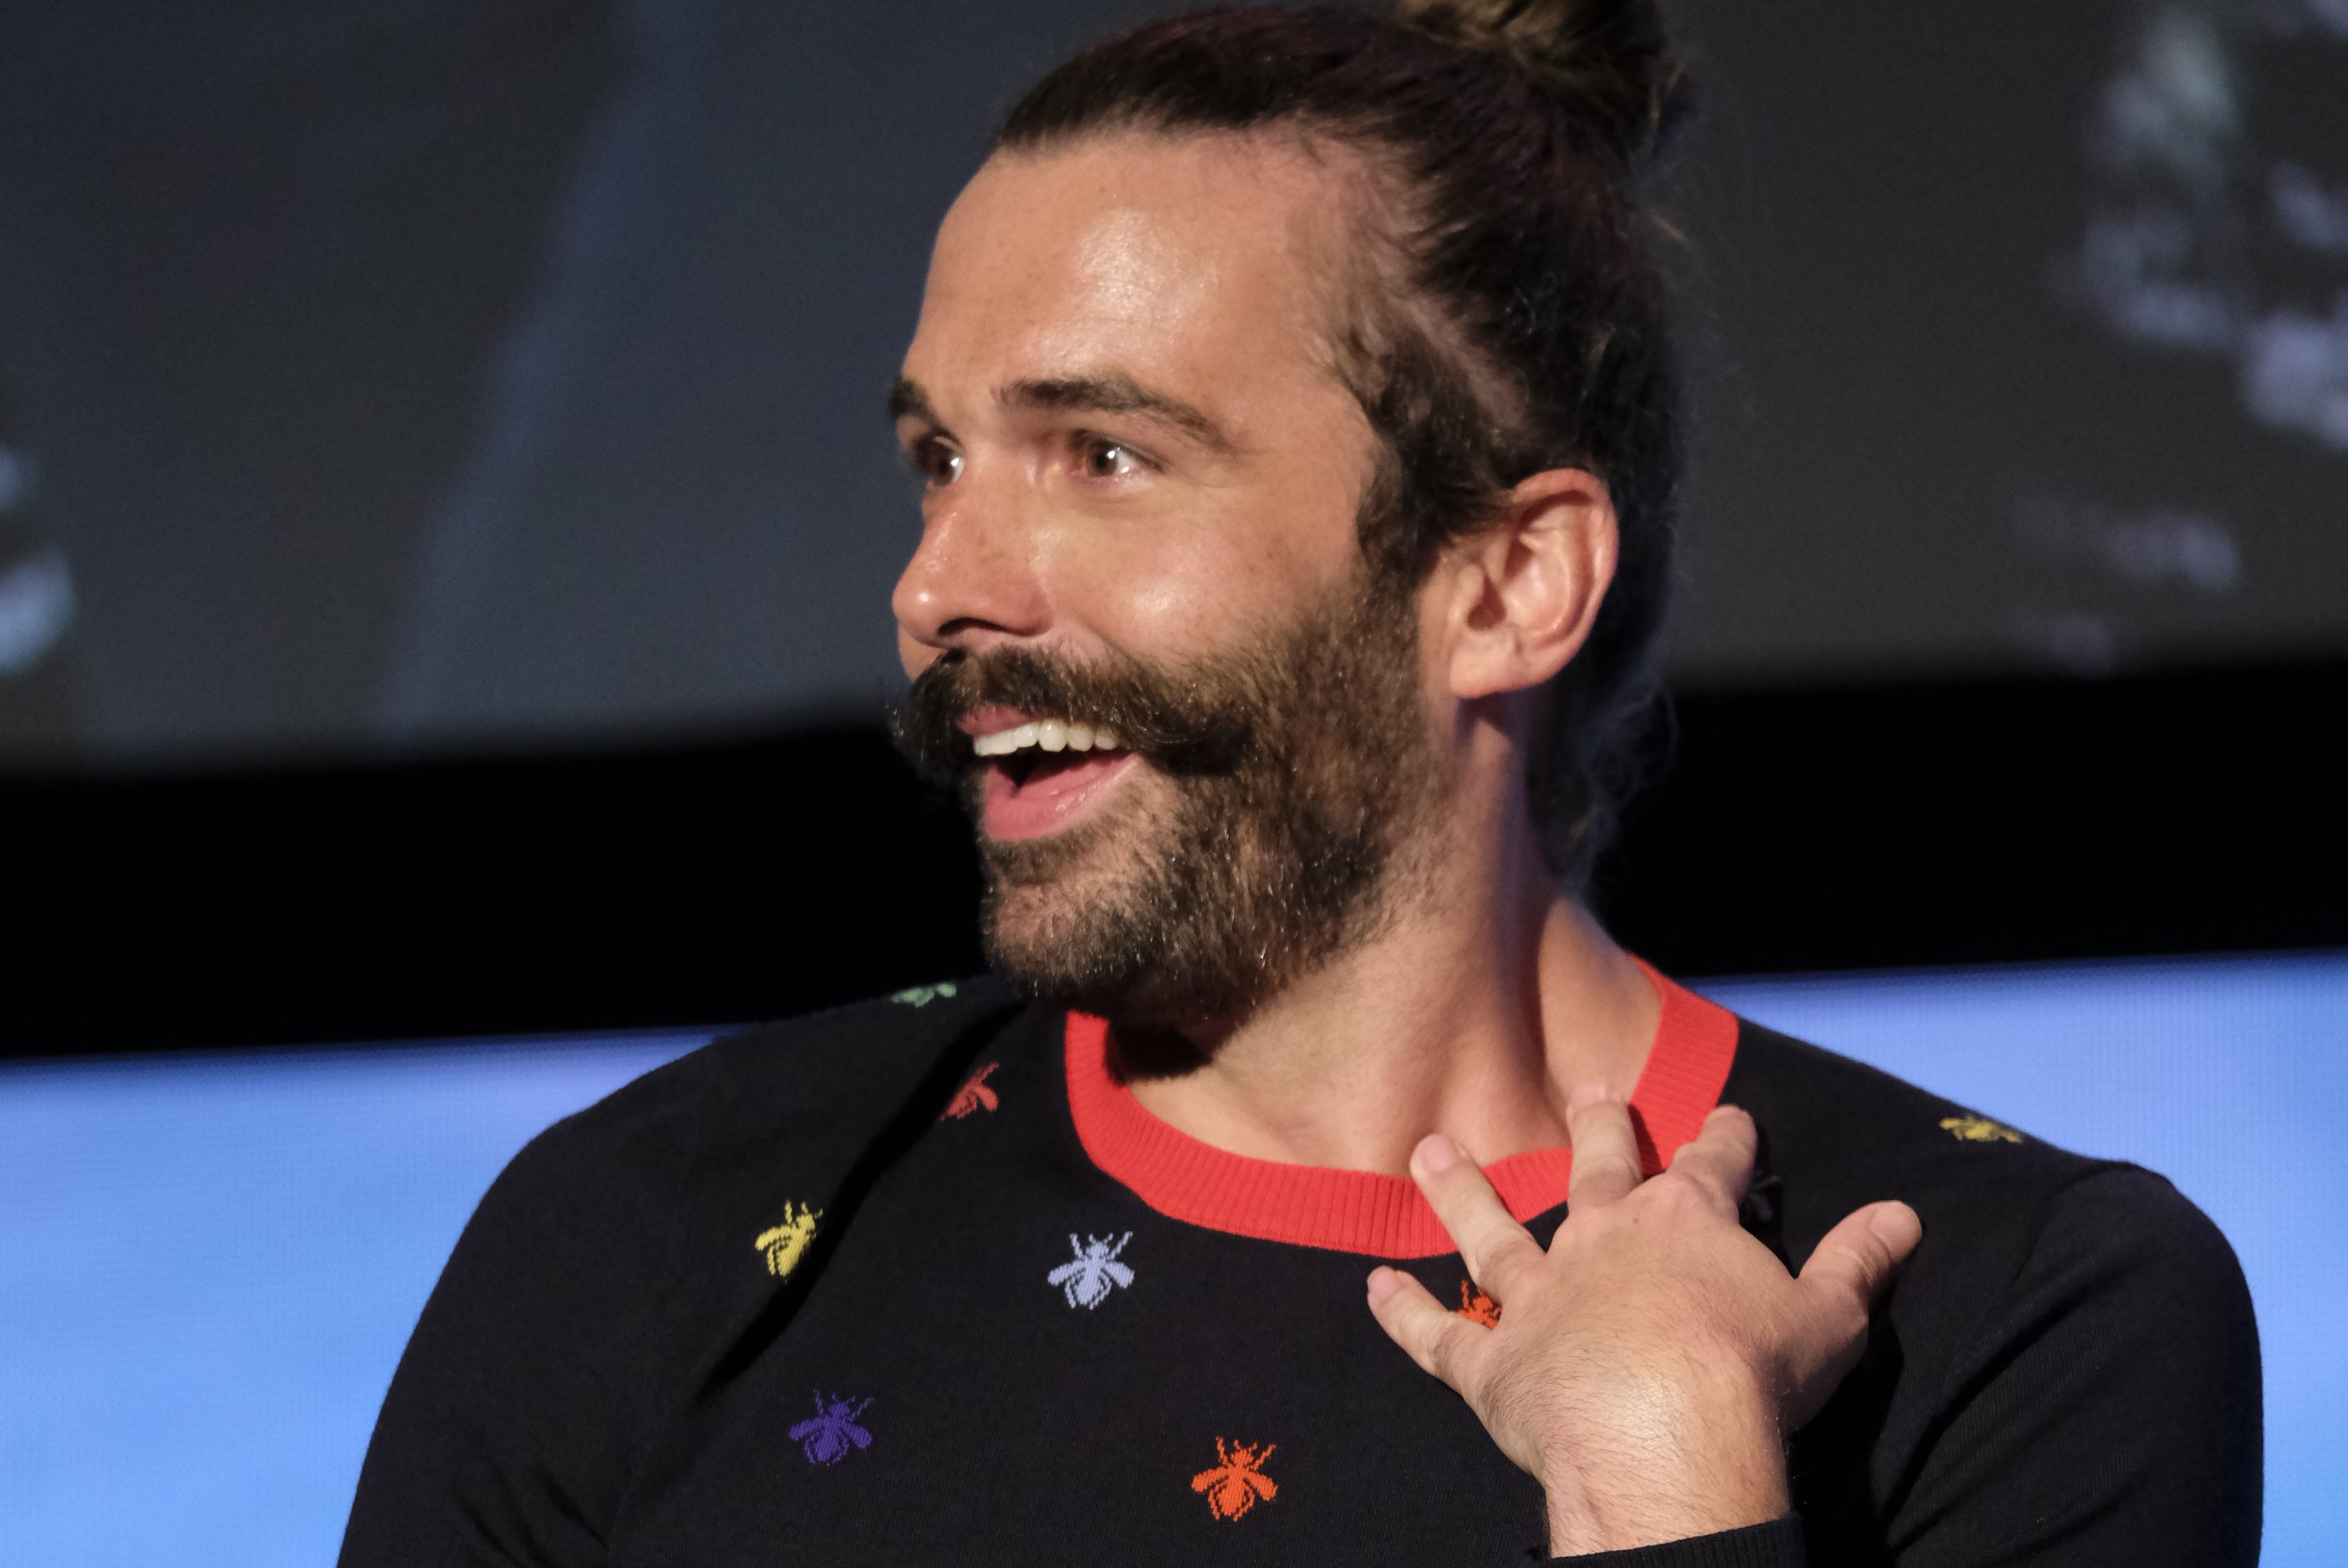 ‘Queer Eye’ Glam Queen Jonathan Van Ness Comes Out As Non-Binary